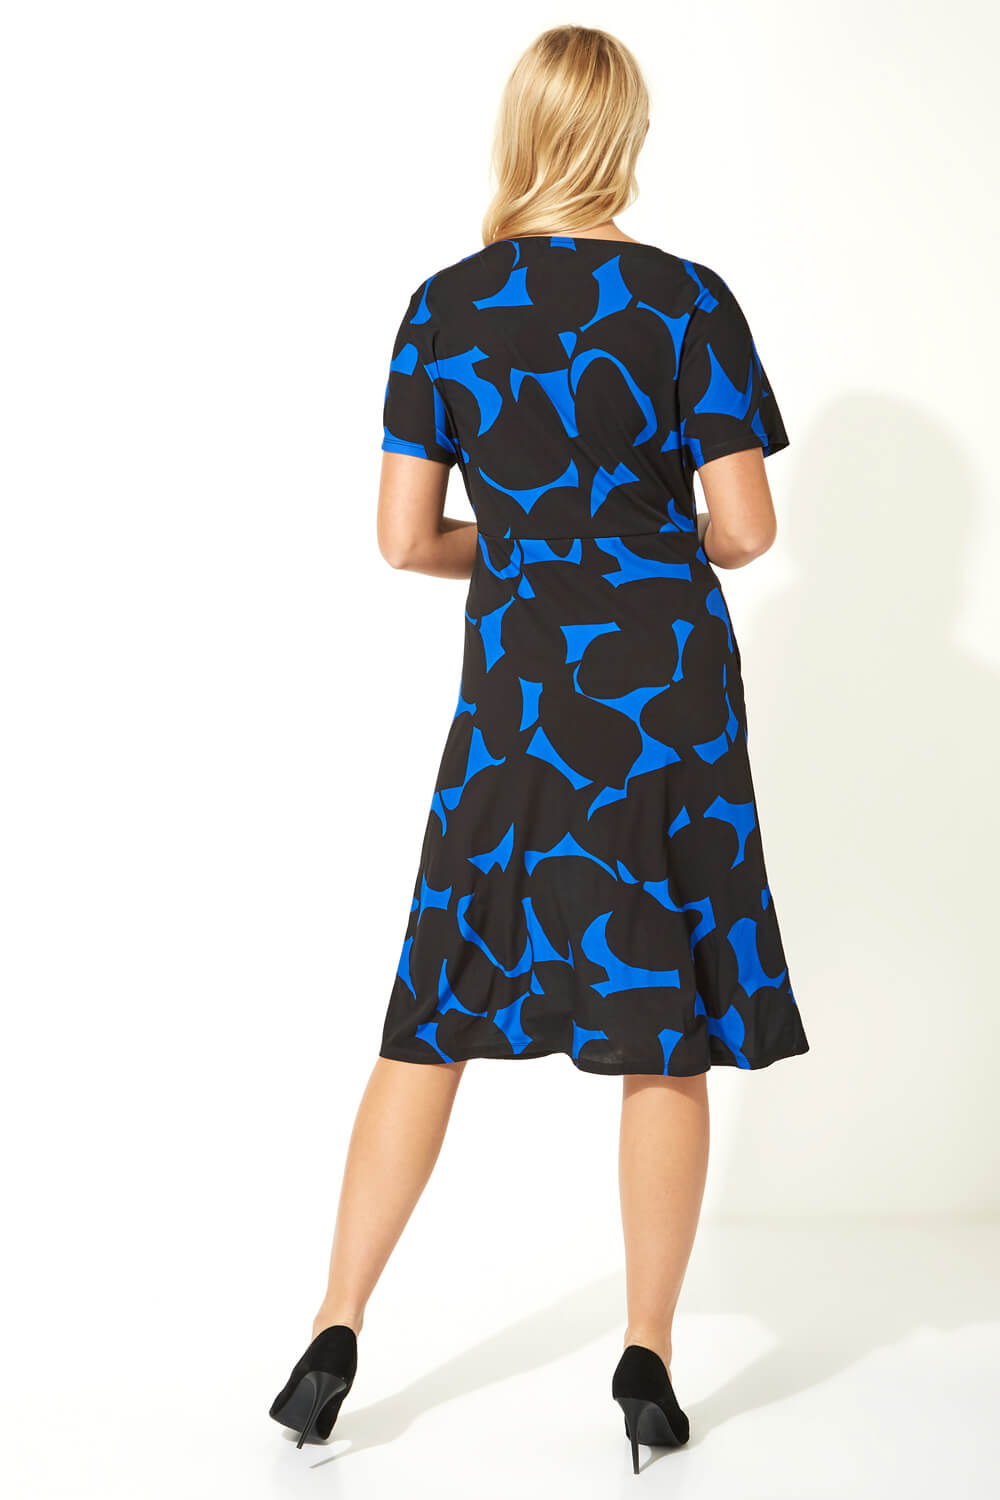 Royal Blue Abstract Leaf Print Gathered Dress, Image 3 of 5